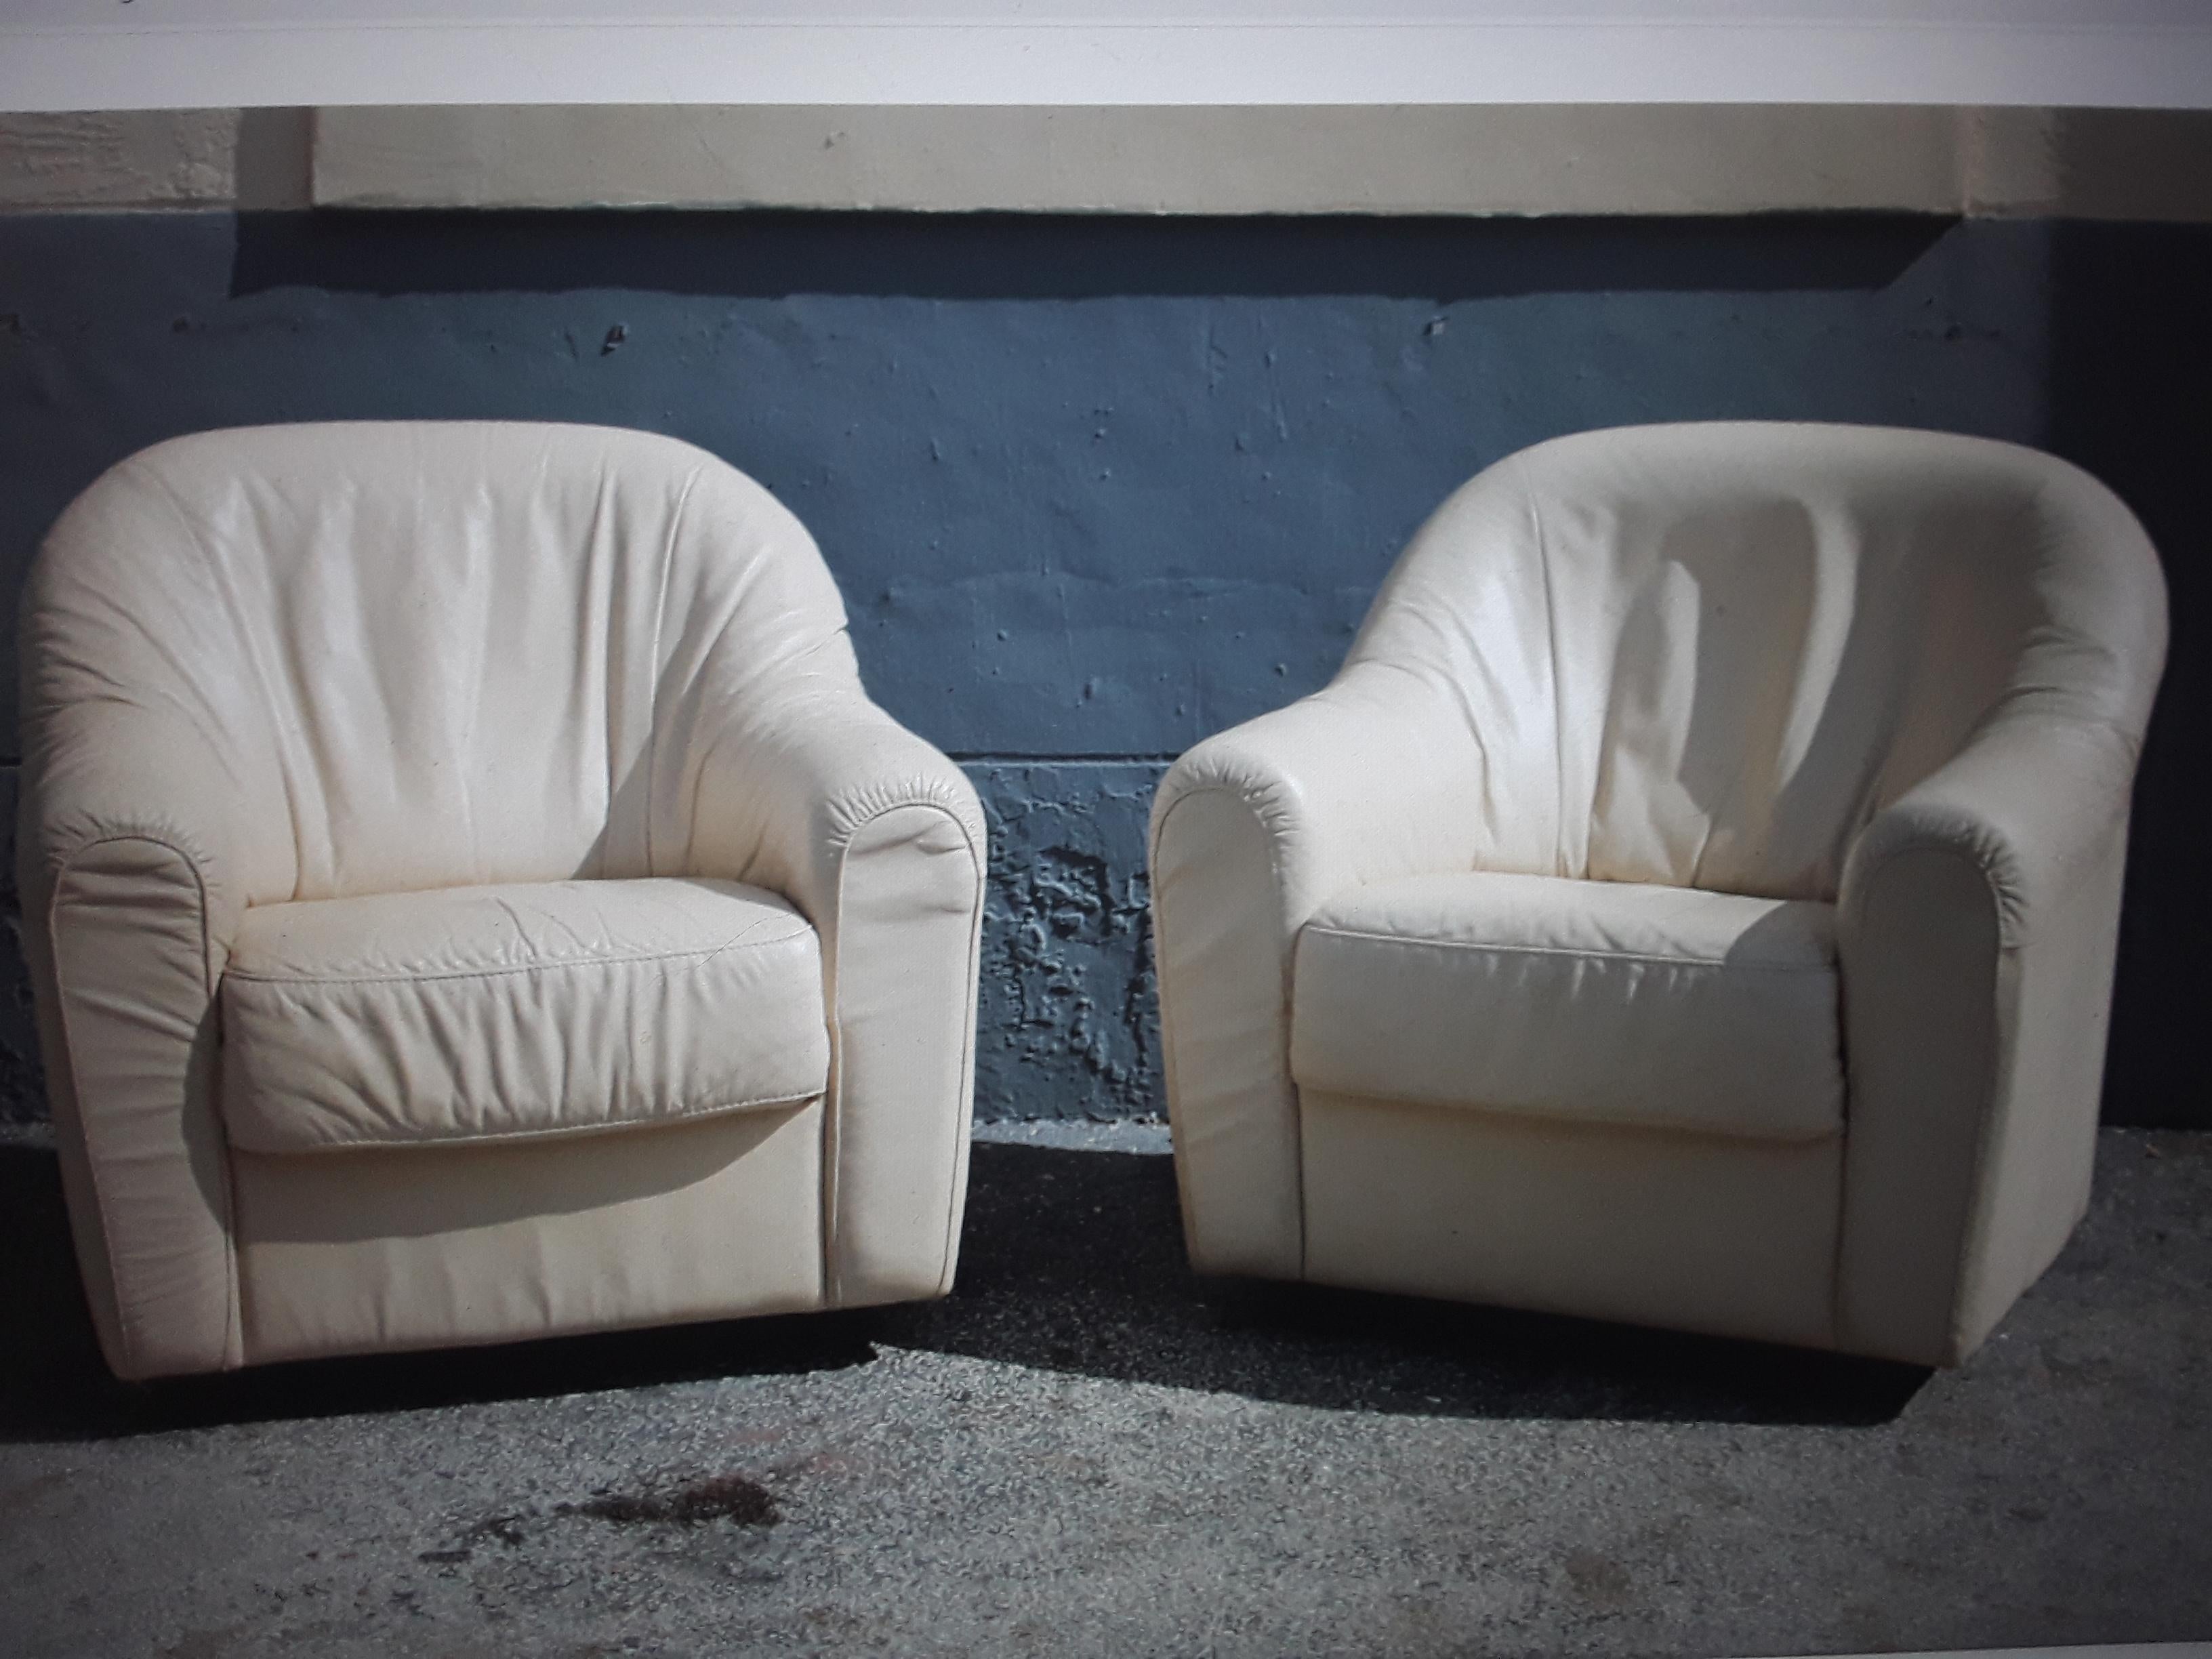 Pair Mid Century Modern Cream Toned Leather Swivel Club Chairs. These chairs are very comfortable!